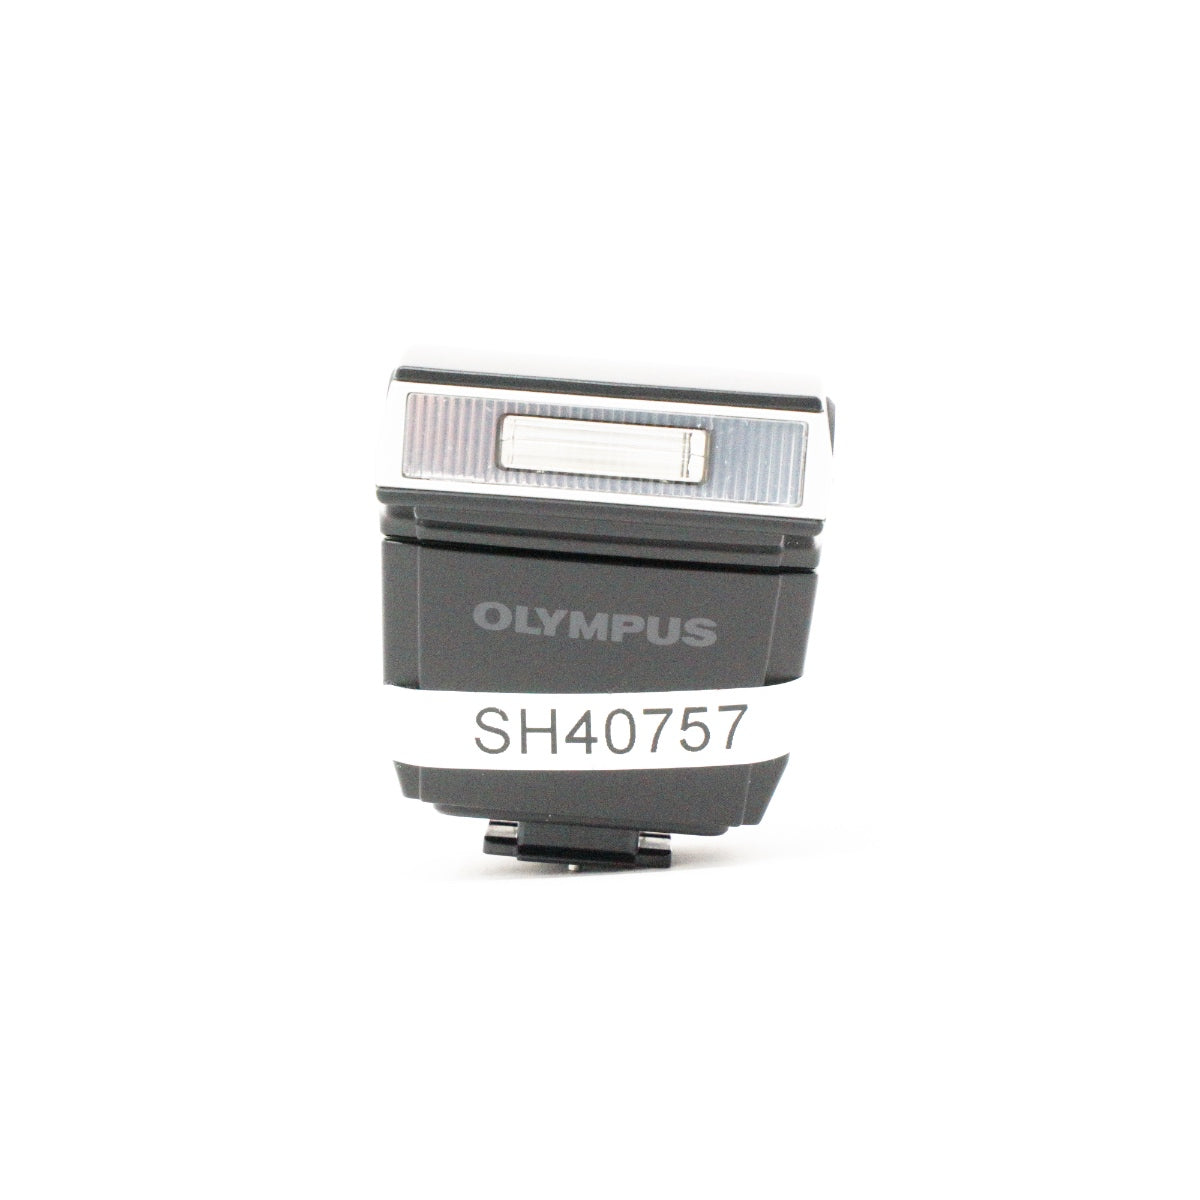 Used Olympus Flash FL-LM3 with bounce feature